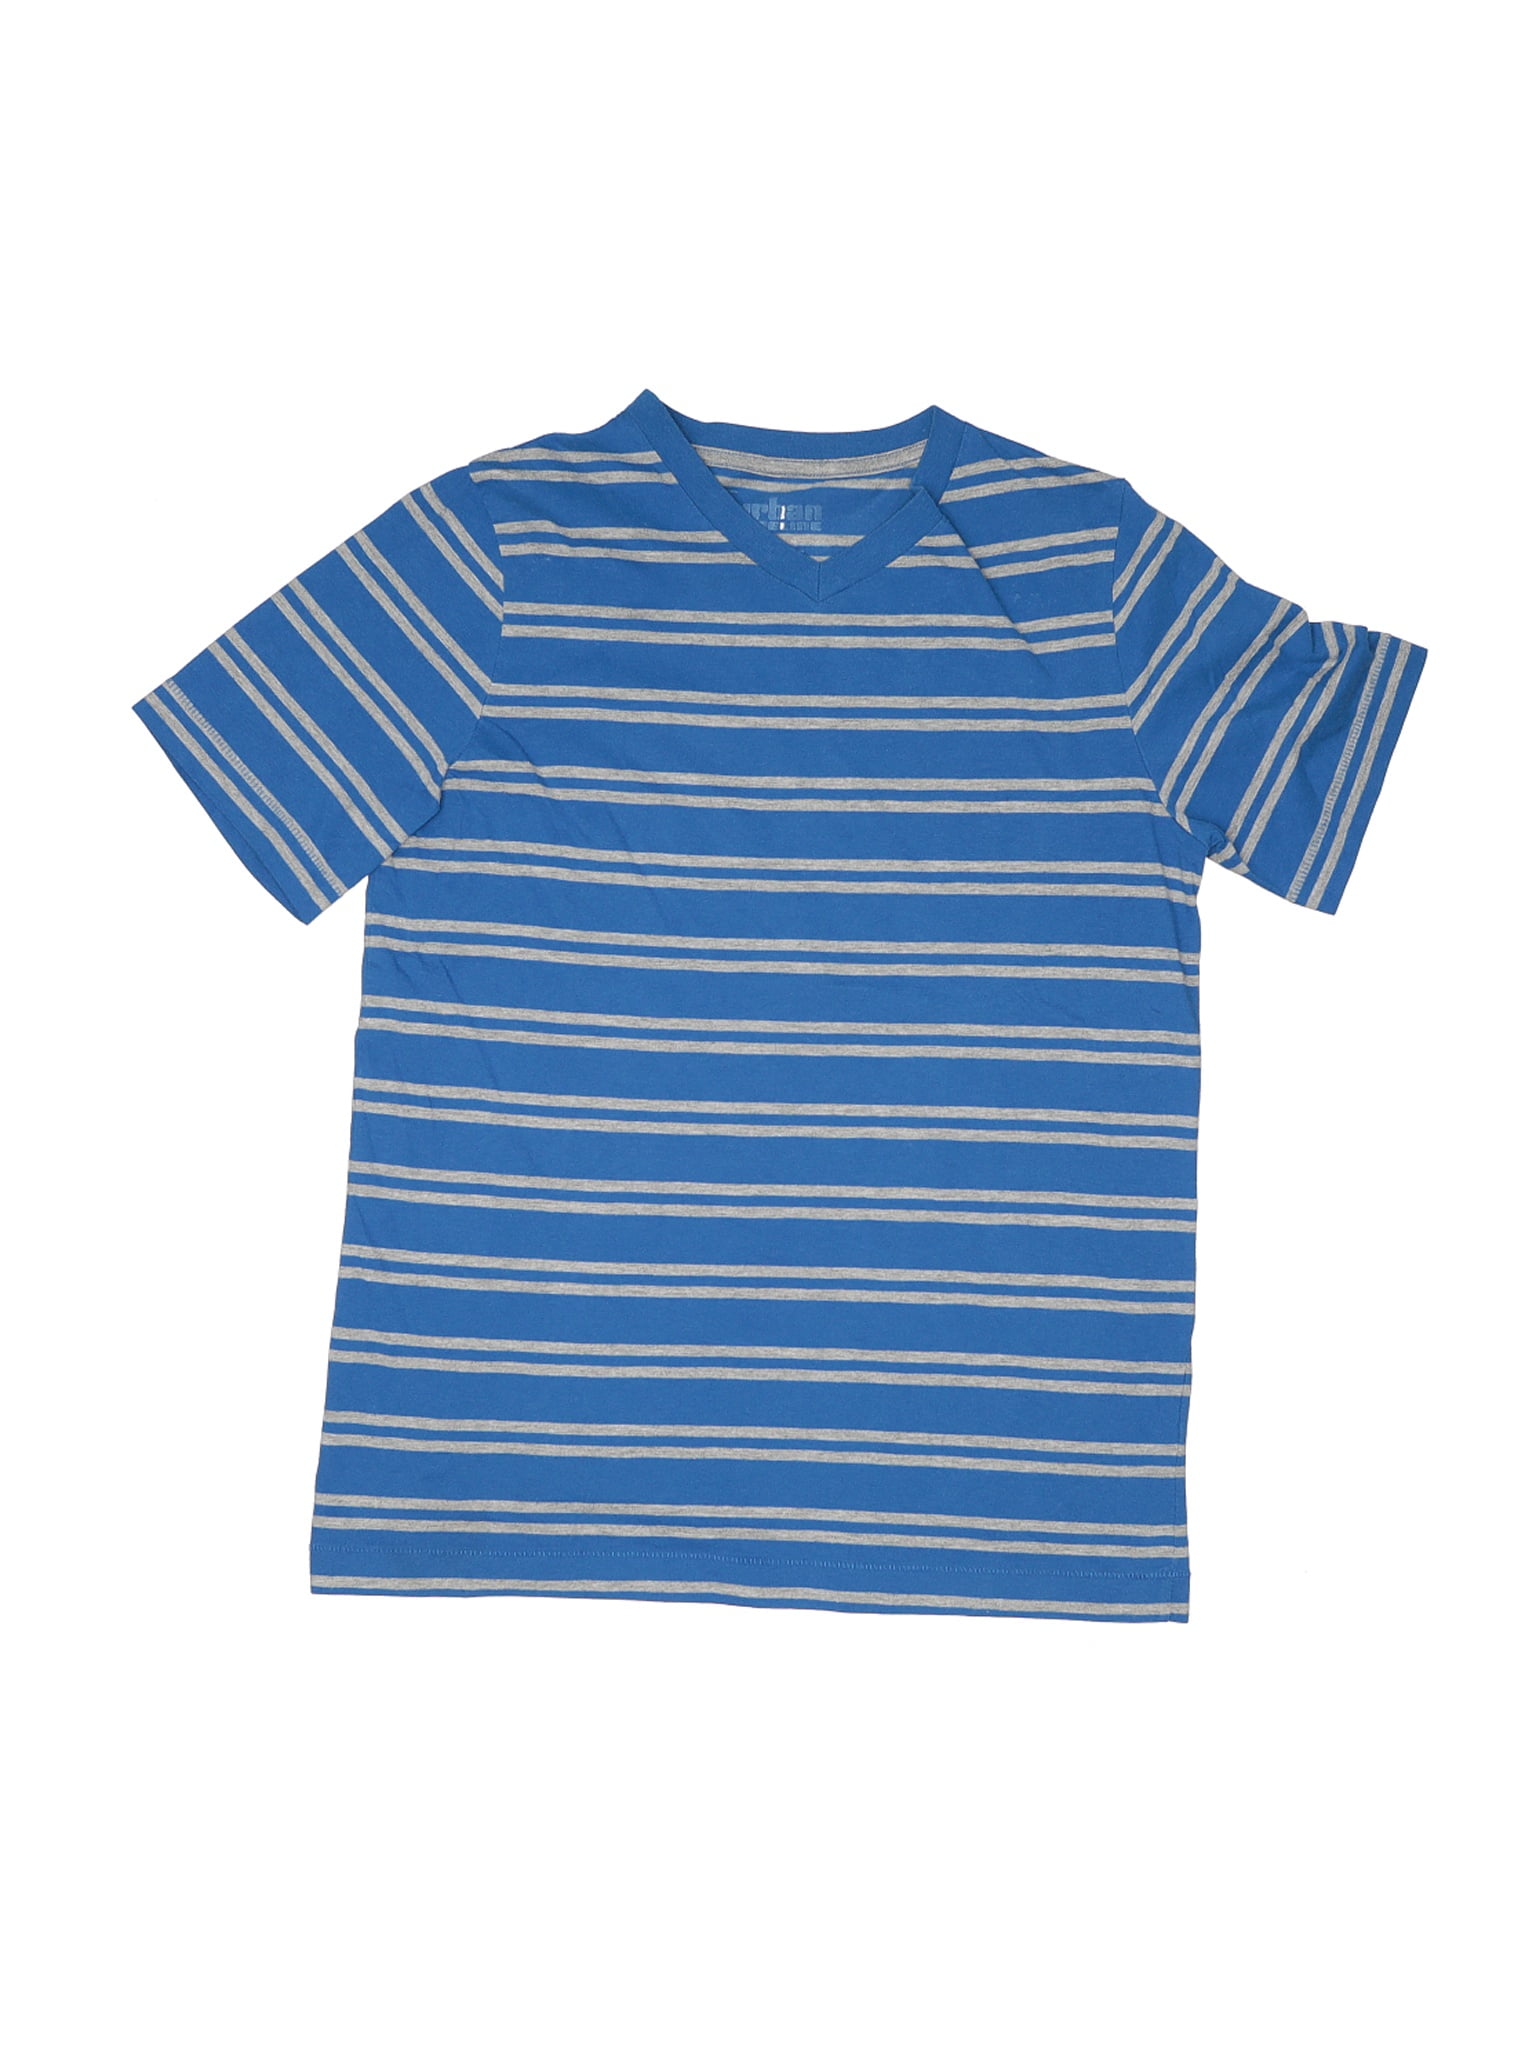 Urban Pipeline - Pre-Owned Urban Pipeline Boy's Size L Youth Short ...